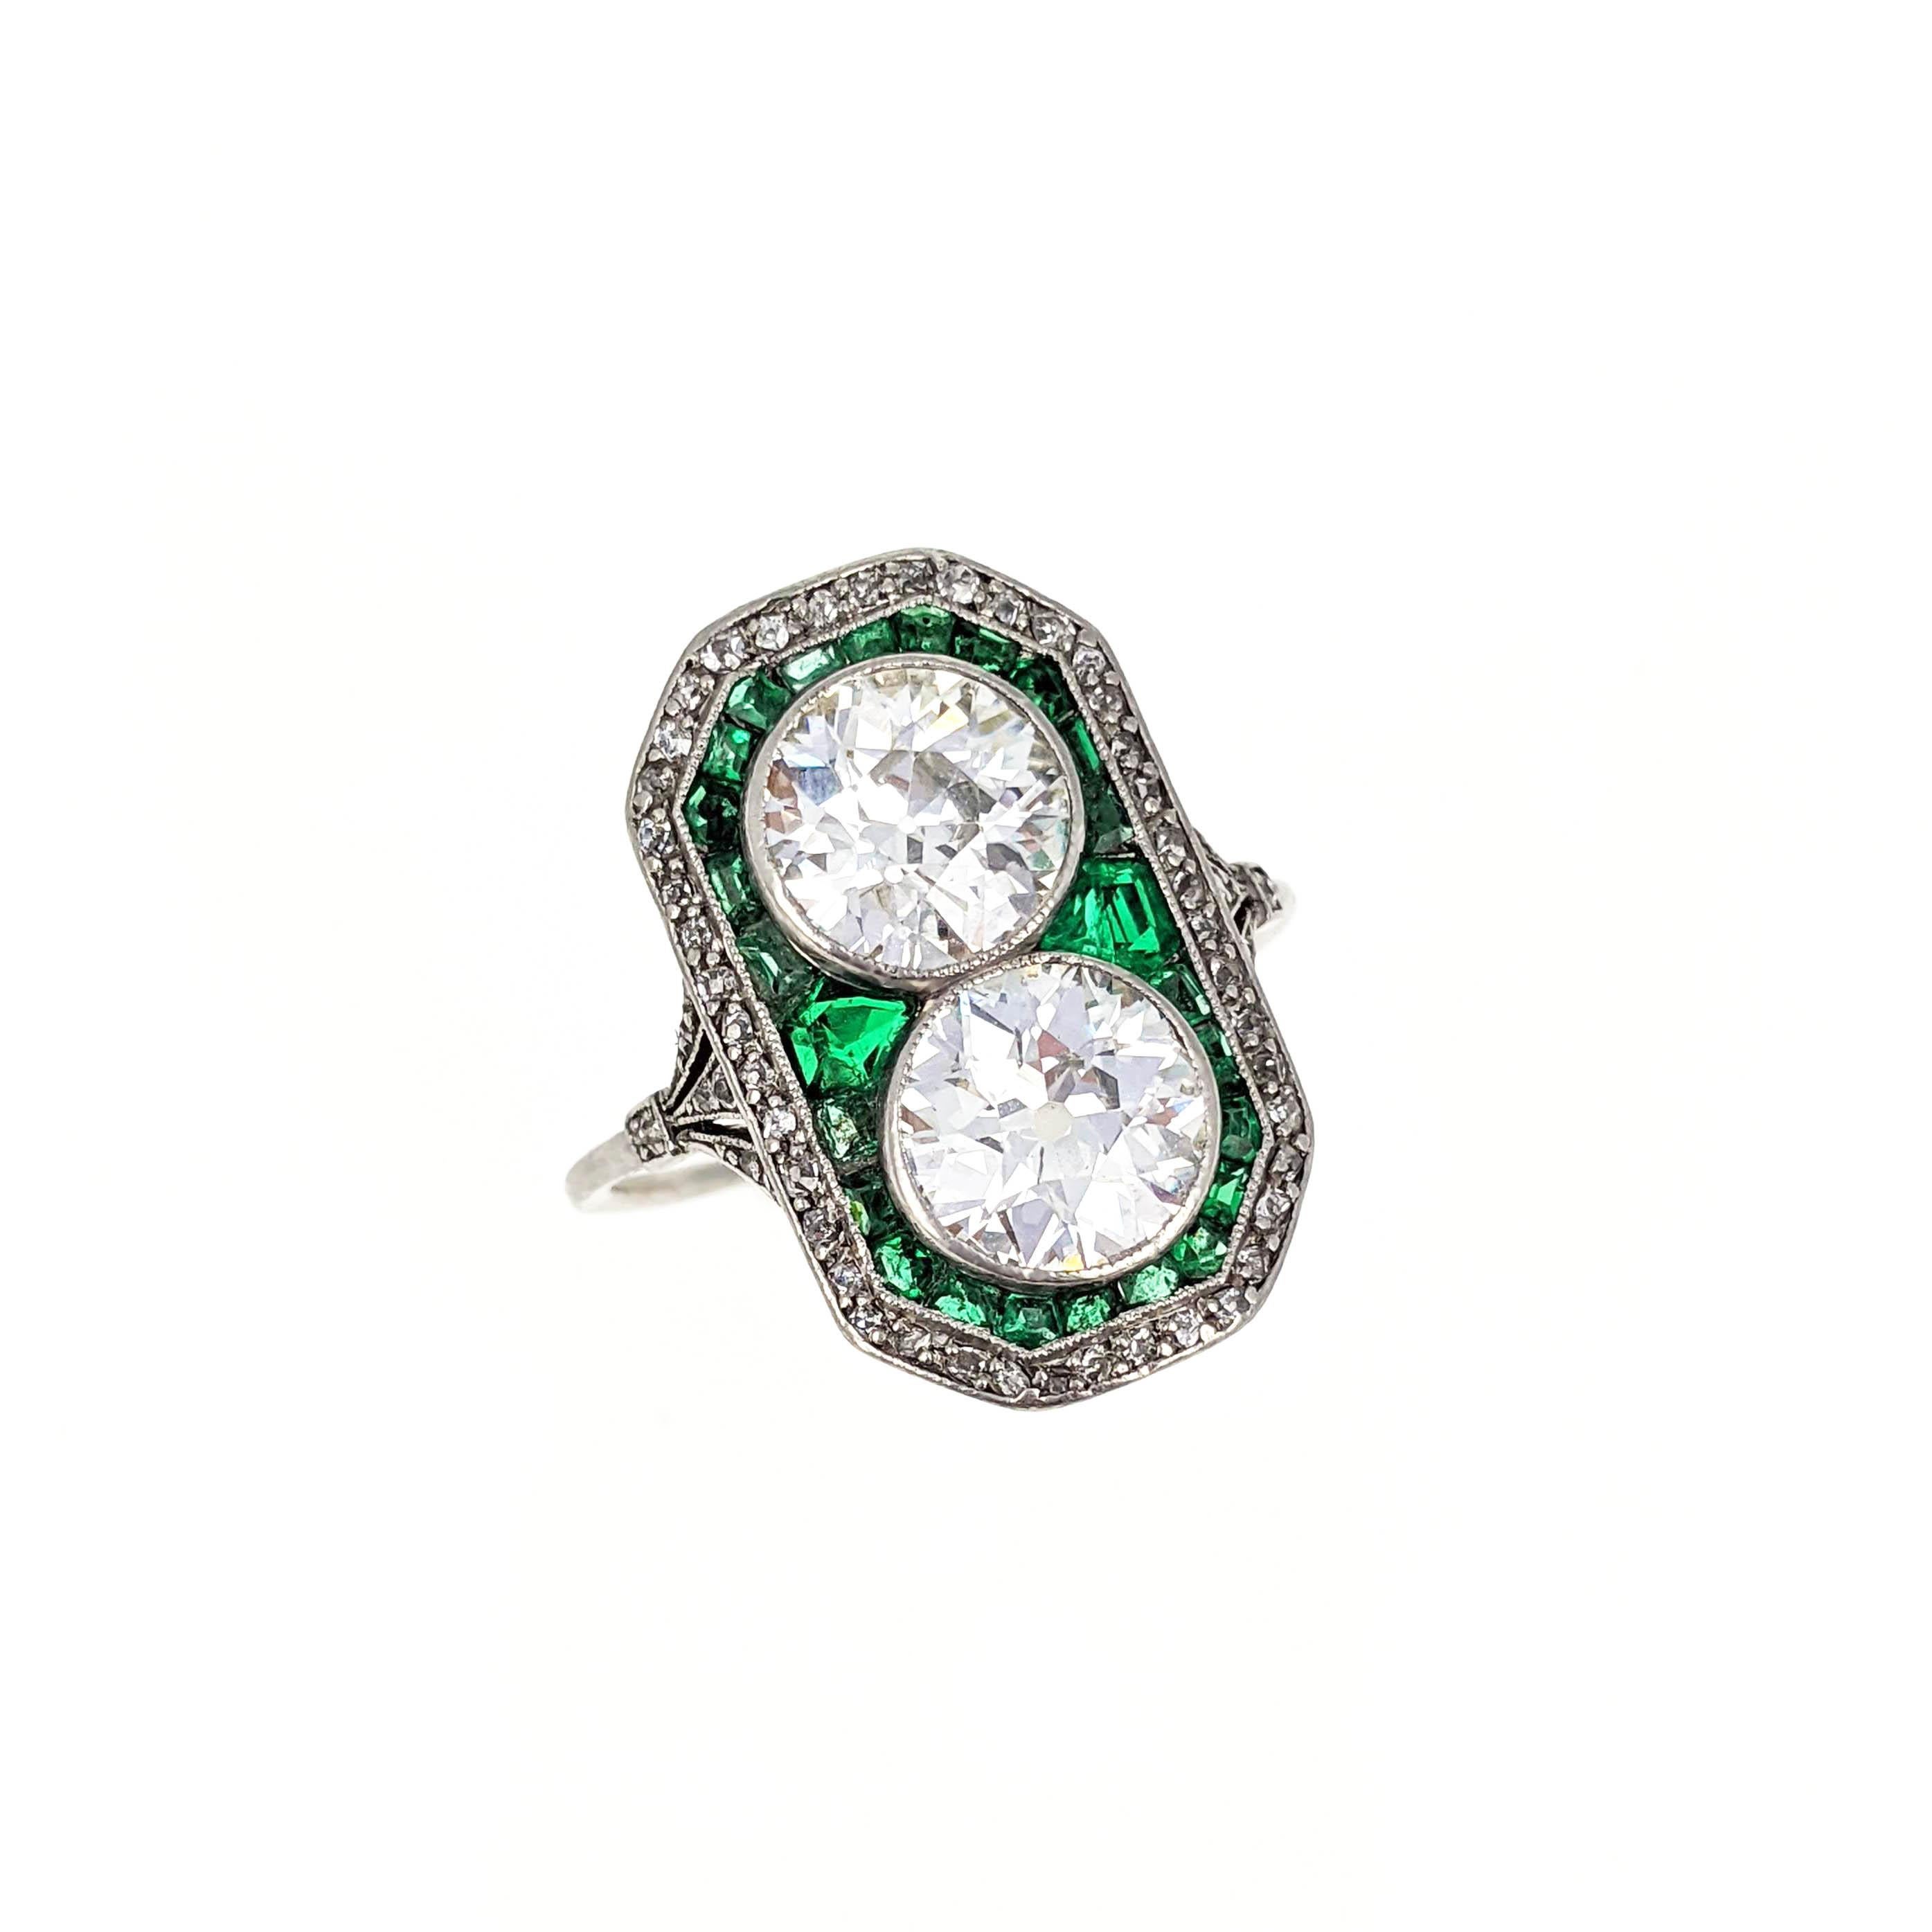 This beautiful Belle Epoque ring features two old European-cut diamonds weighing approximately 3 carats total. They are surrounded by calibre-cut emeralds with a border of rose-cut diamonds. The ring is mounted in platinum with French assay mark.